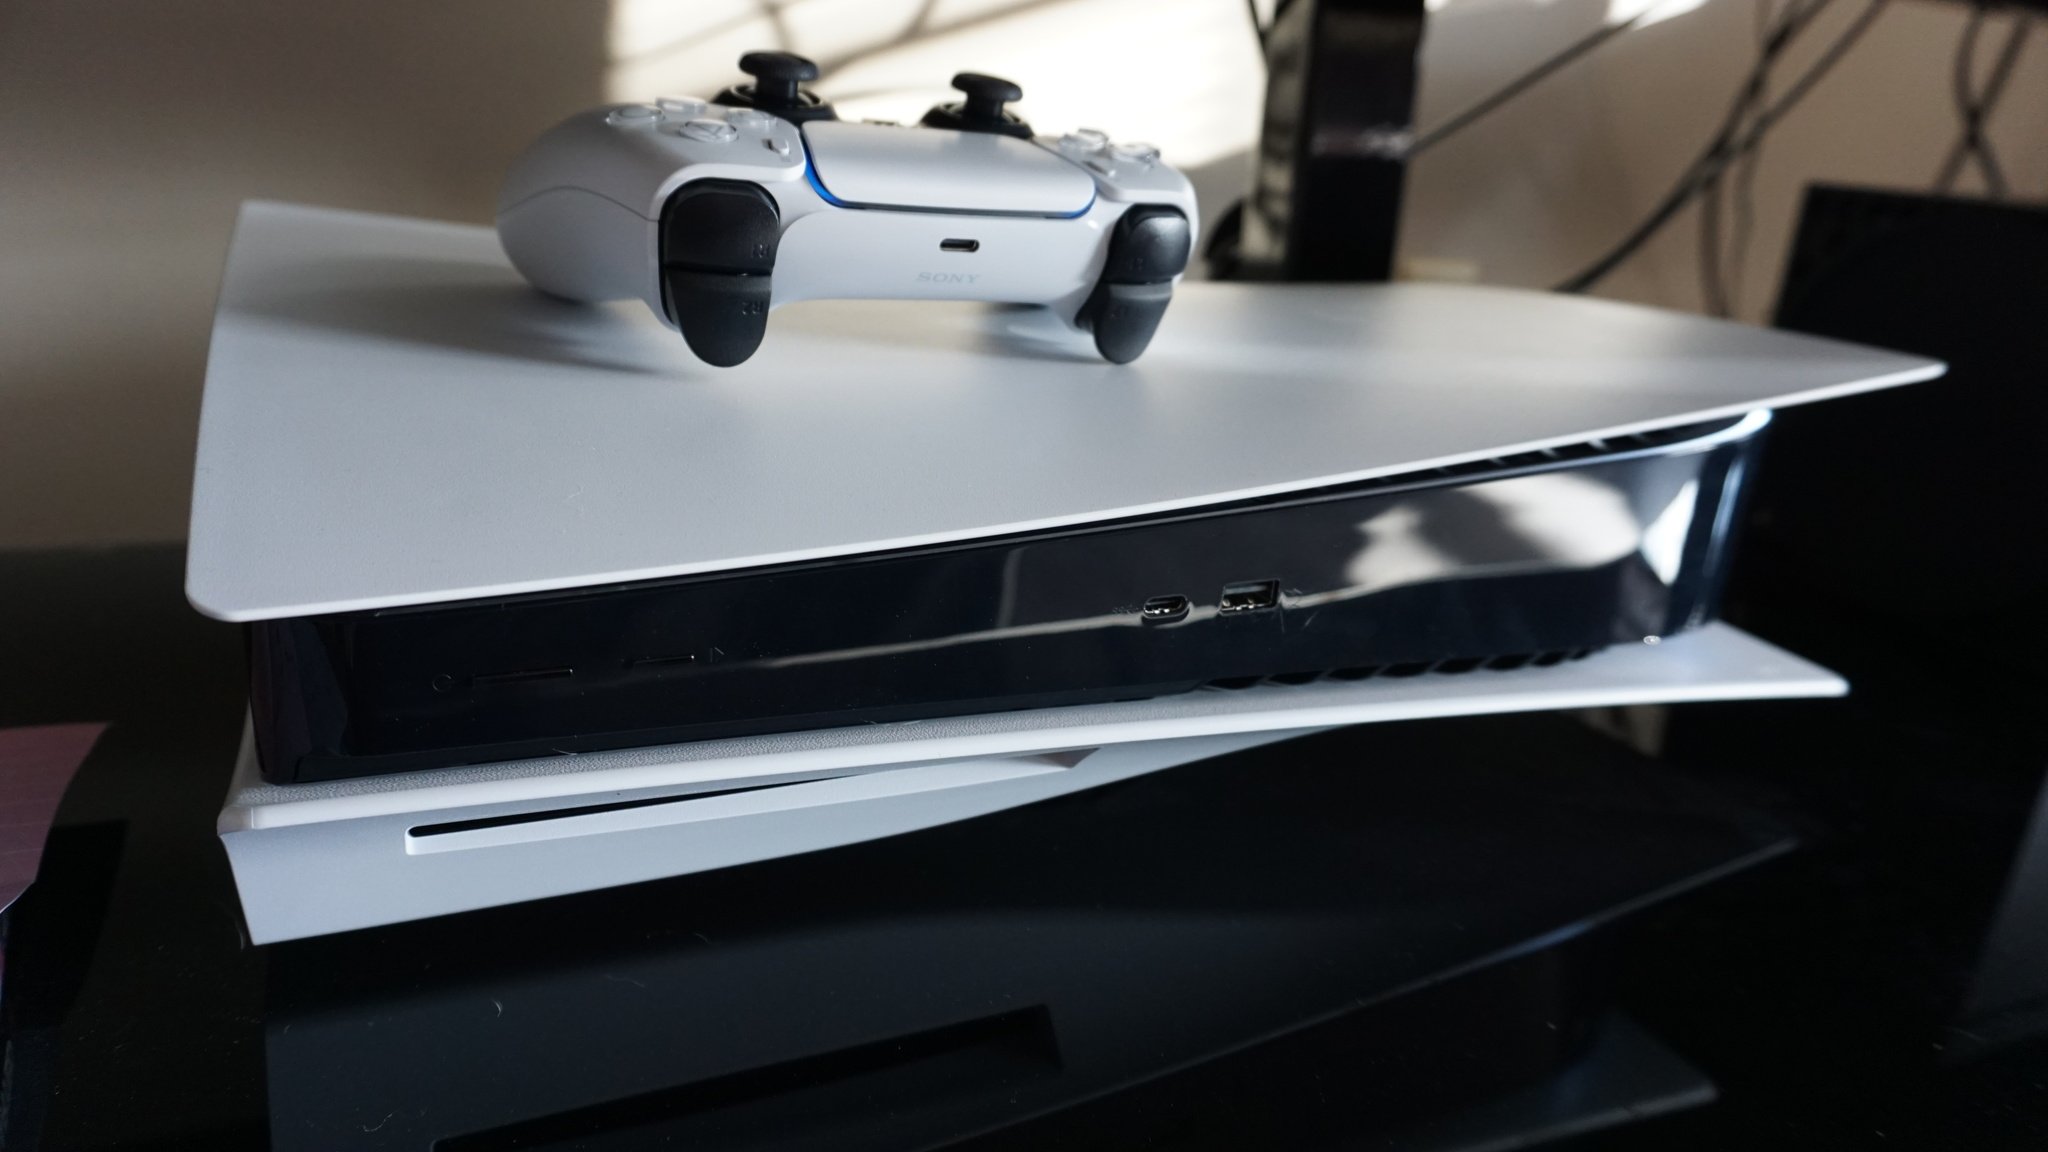 PS5 vs. PS4 Pro: Which should you buy?